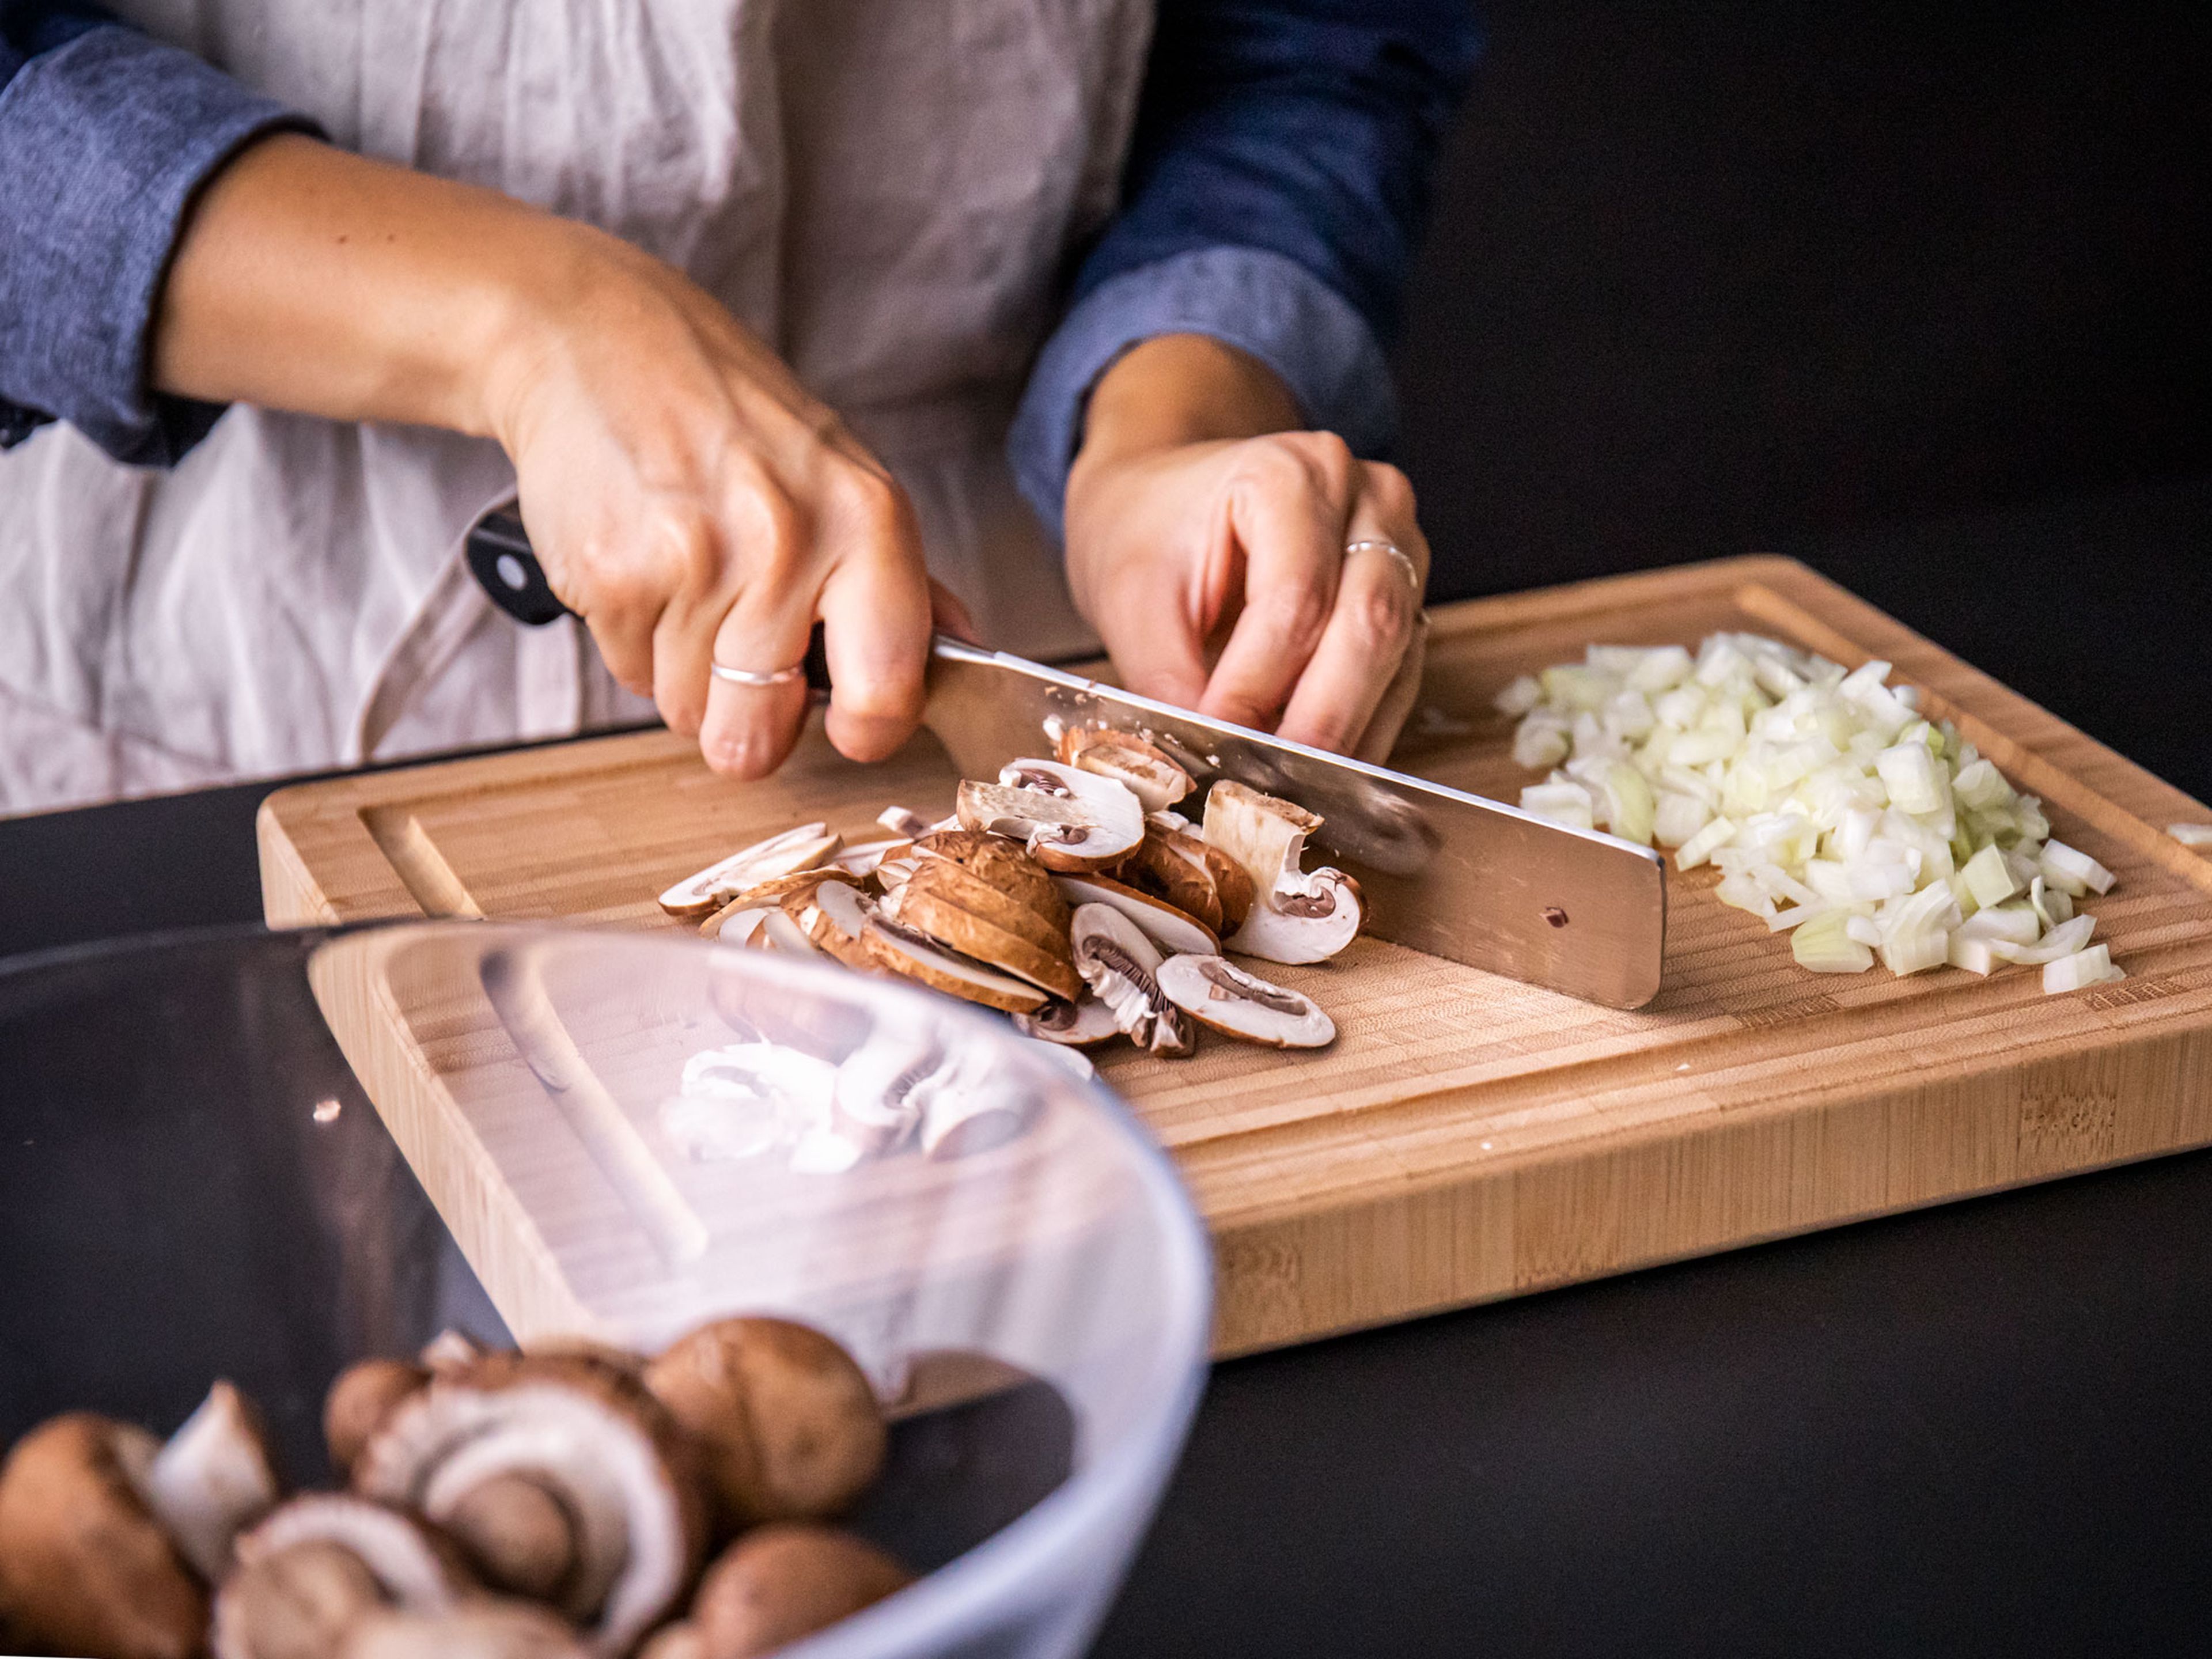 Wipe any dirt from mushrooms and thinly slice. Peel and finely dice onion.